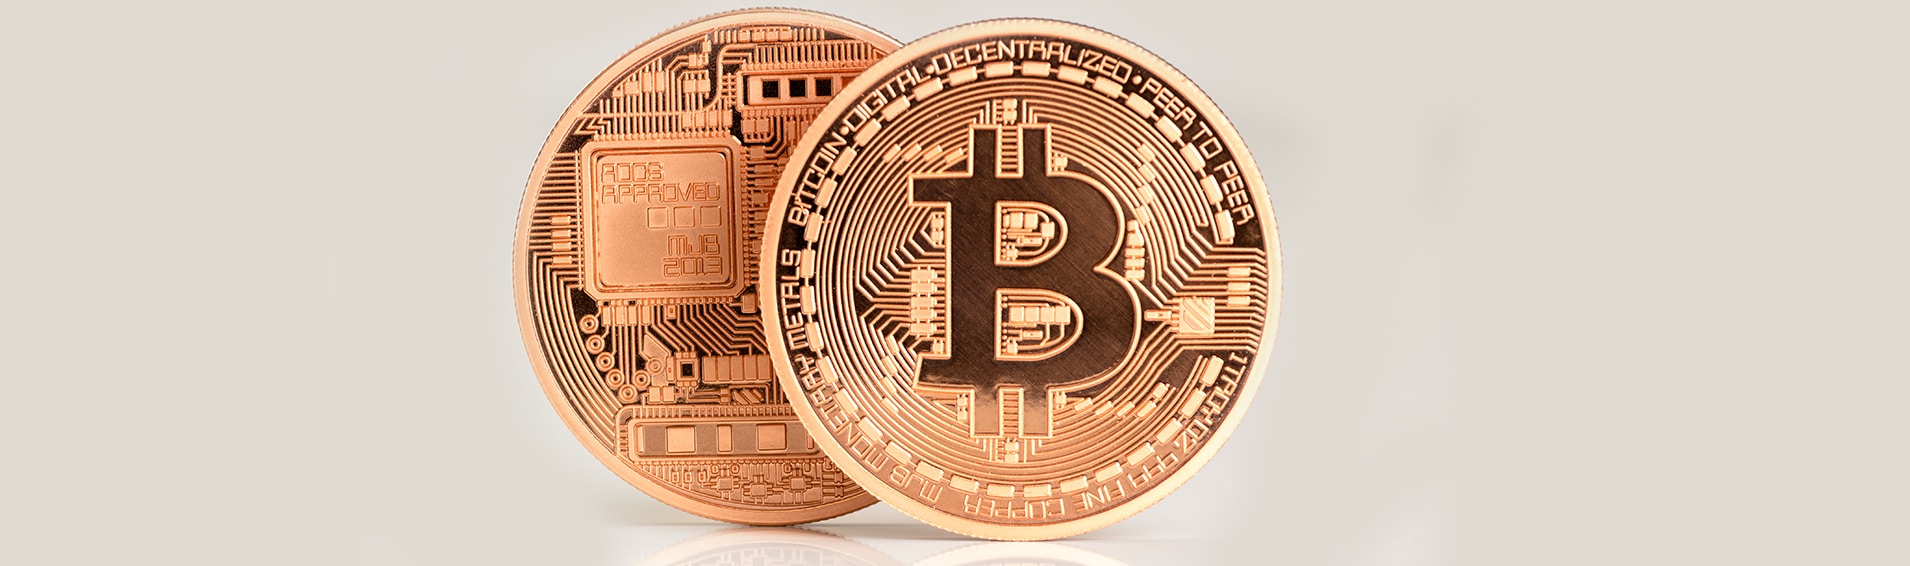 Bitcoins: Heralding the Virtual Currency Revolution